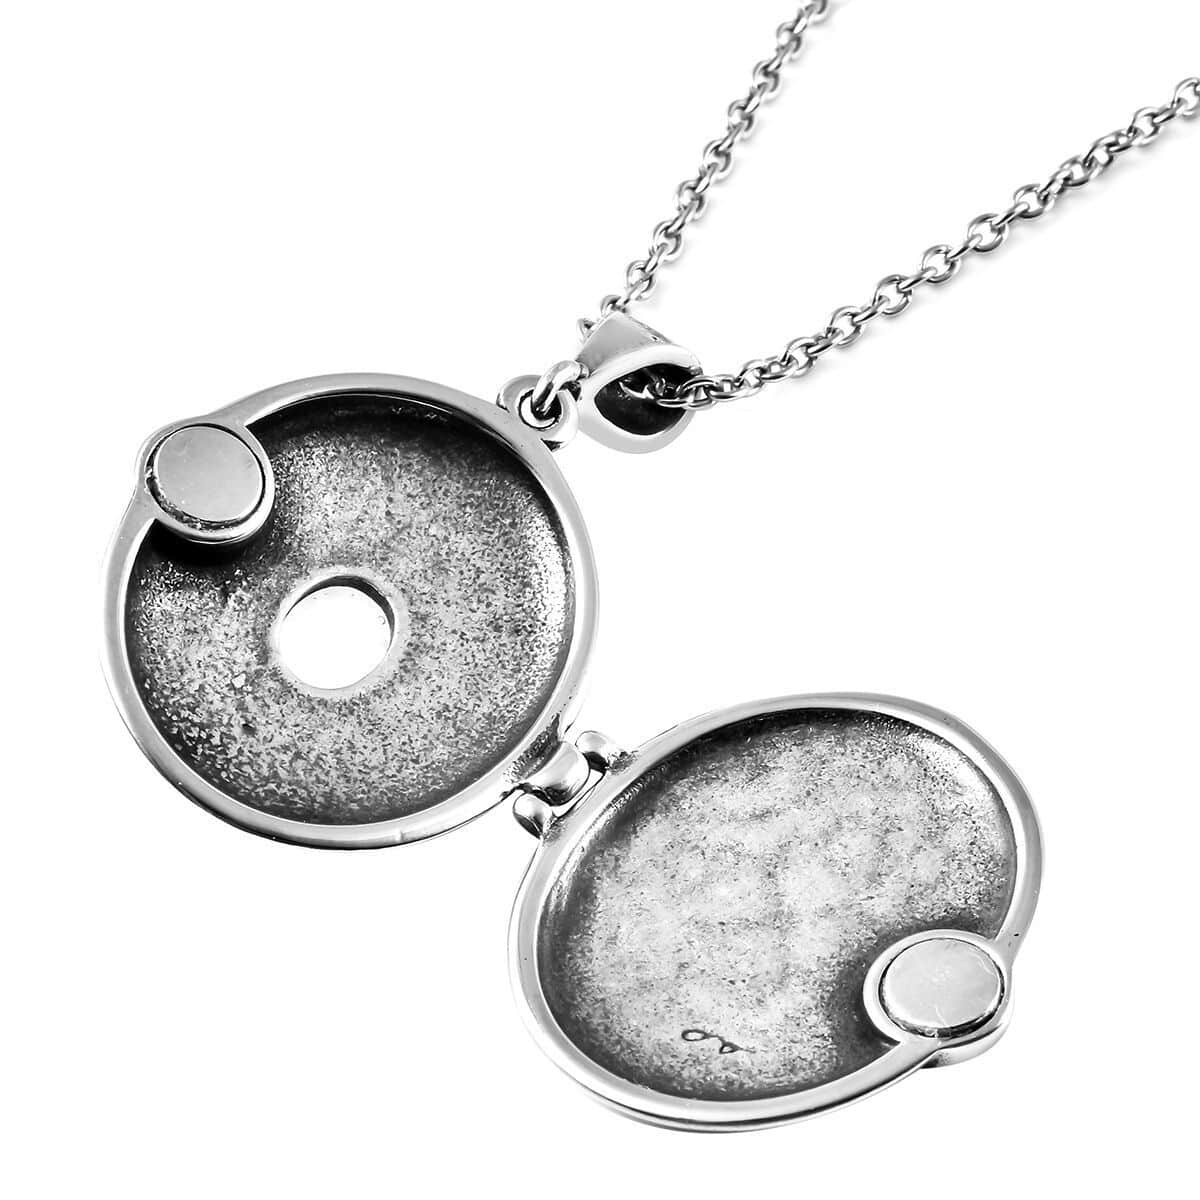 Sri Lankan Silver Moonstone Locket Pendant Necklace in Black Oxidized Stainless Steel 24 Inches image number 5